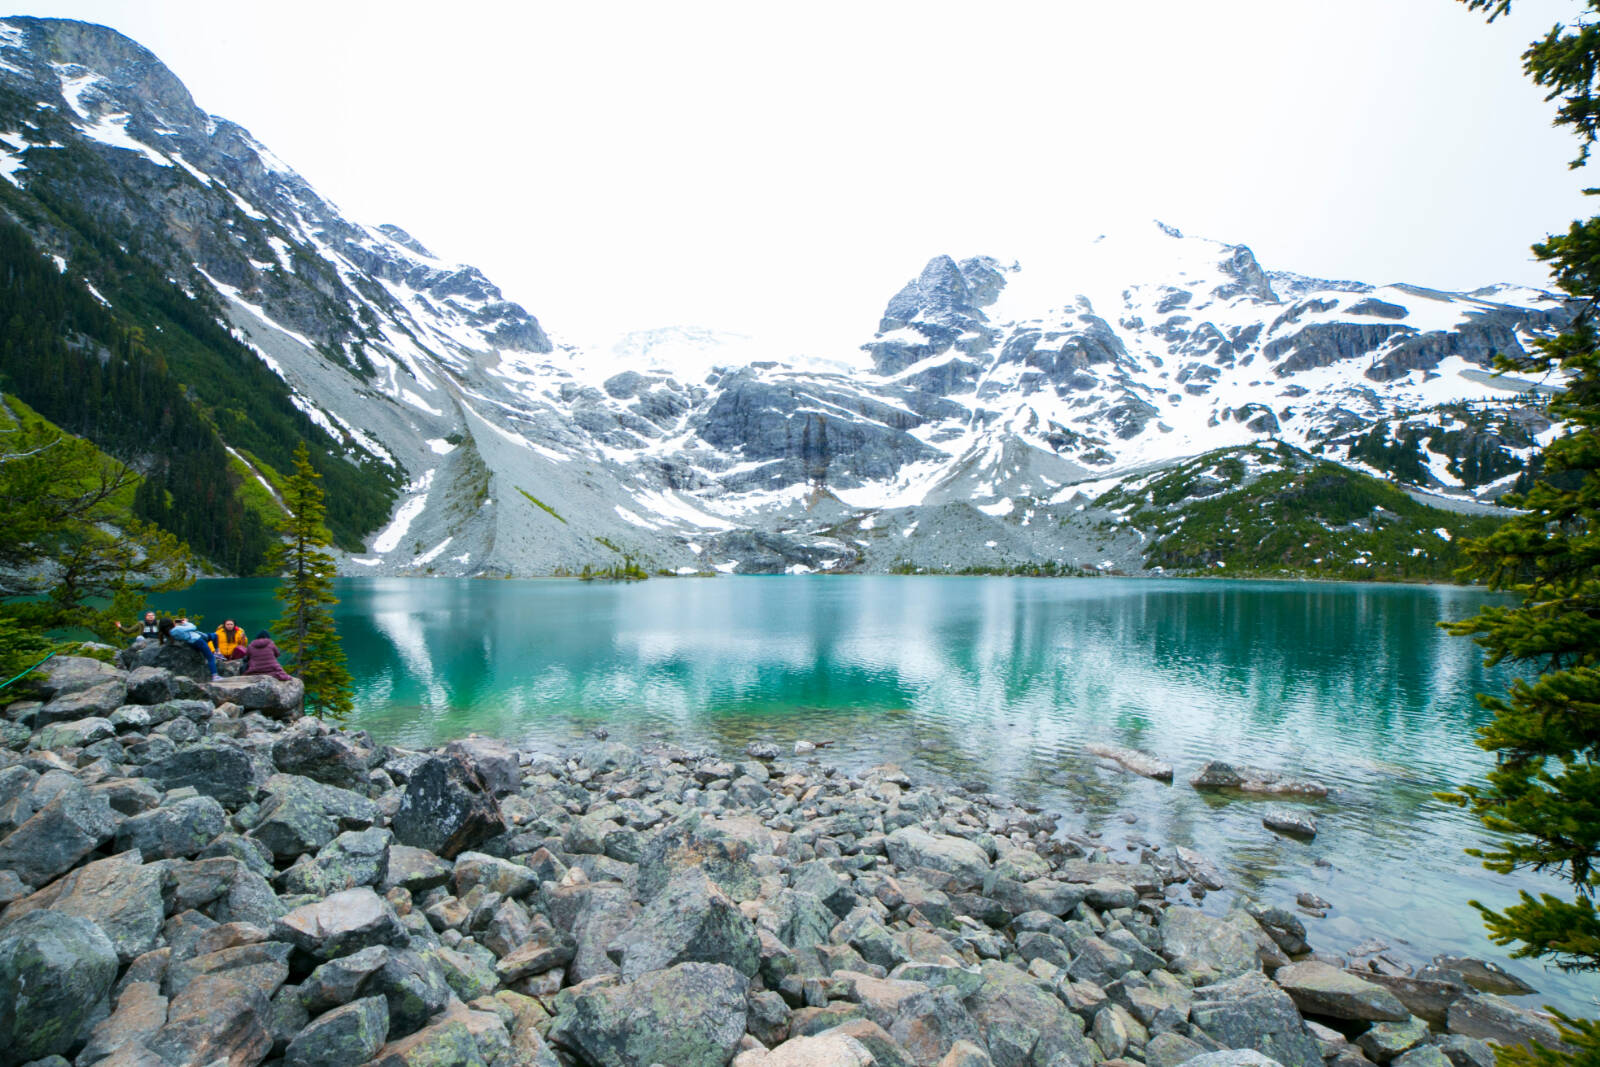 Joffre Lakes Provincial Park will be closed in 2024 from April 30 to May 15, June 14 to 23 and from Sept. 3 to Oct. 6, allowing the Indigenous communities to conduct cultural celebrations and traditional fall harvesting practices. (AdobeStock)